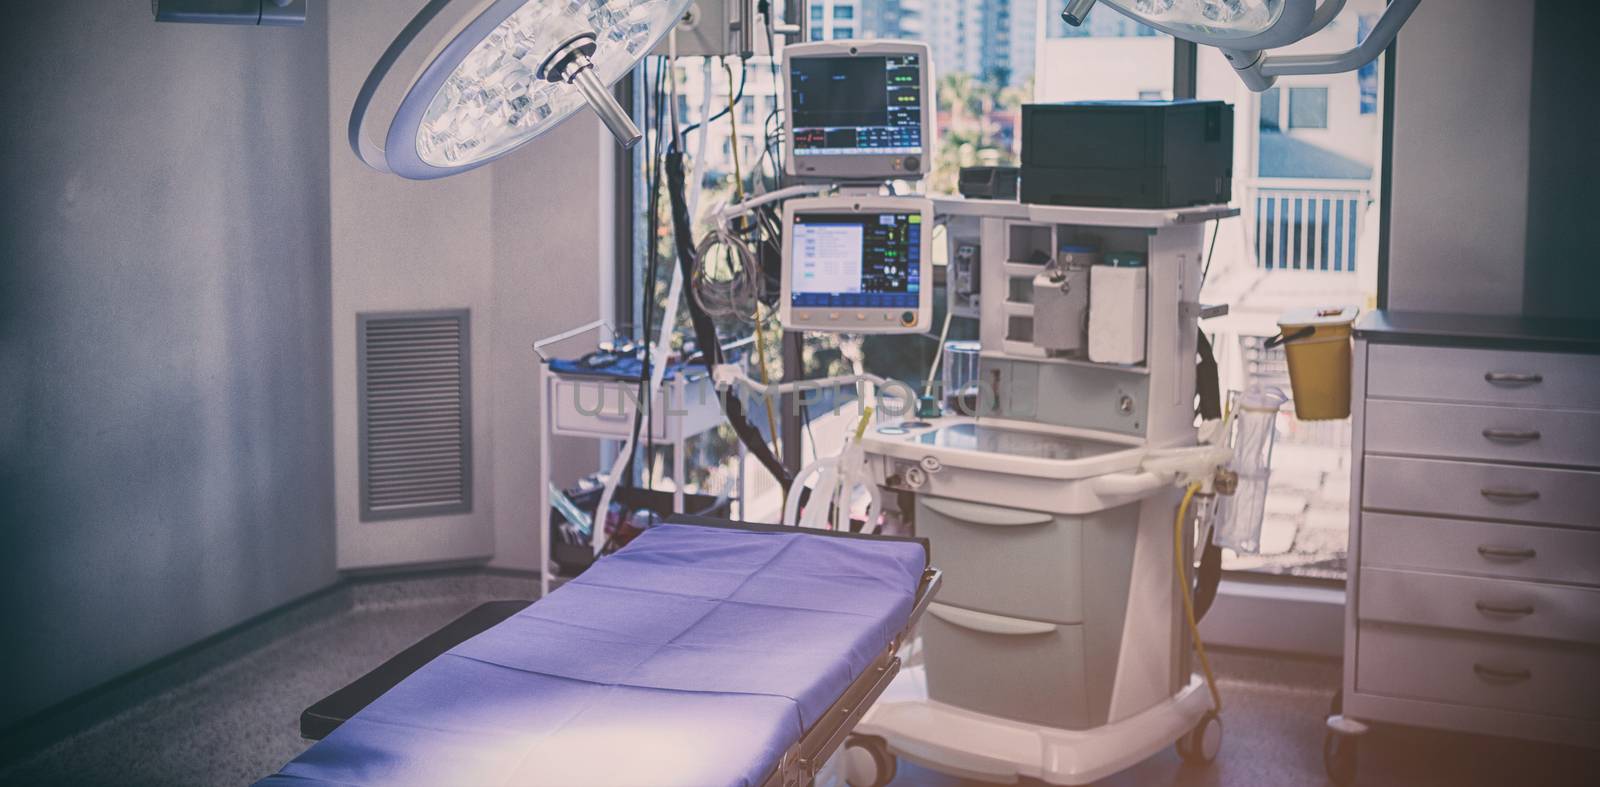 Equipment and medical devices in modern operating room by Wavebreakmedia